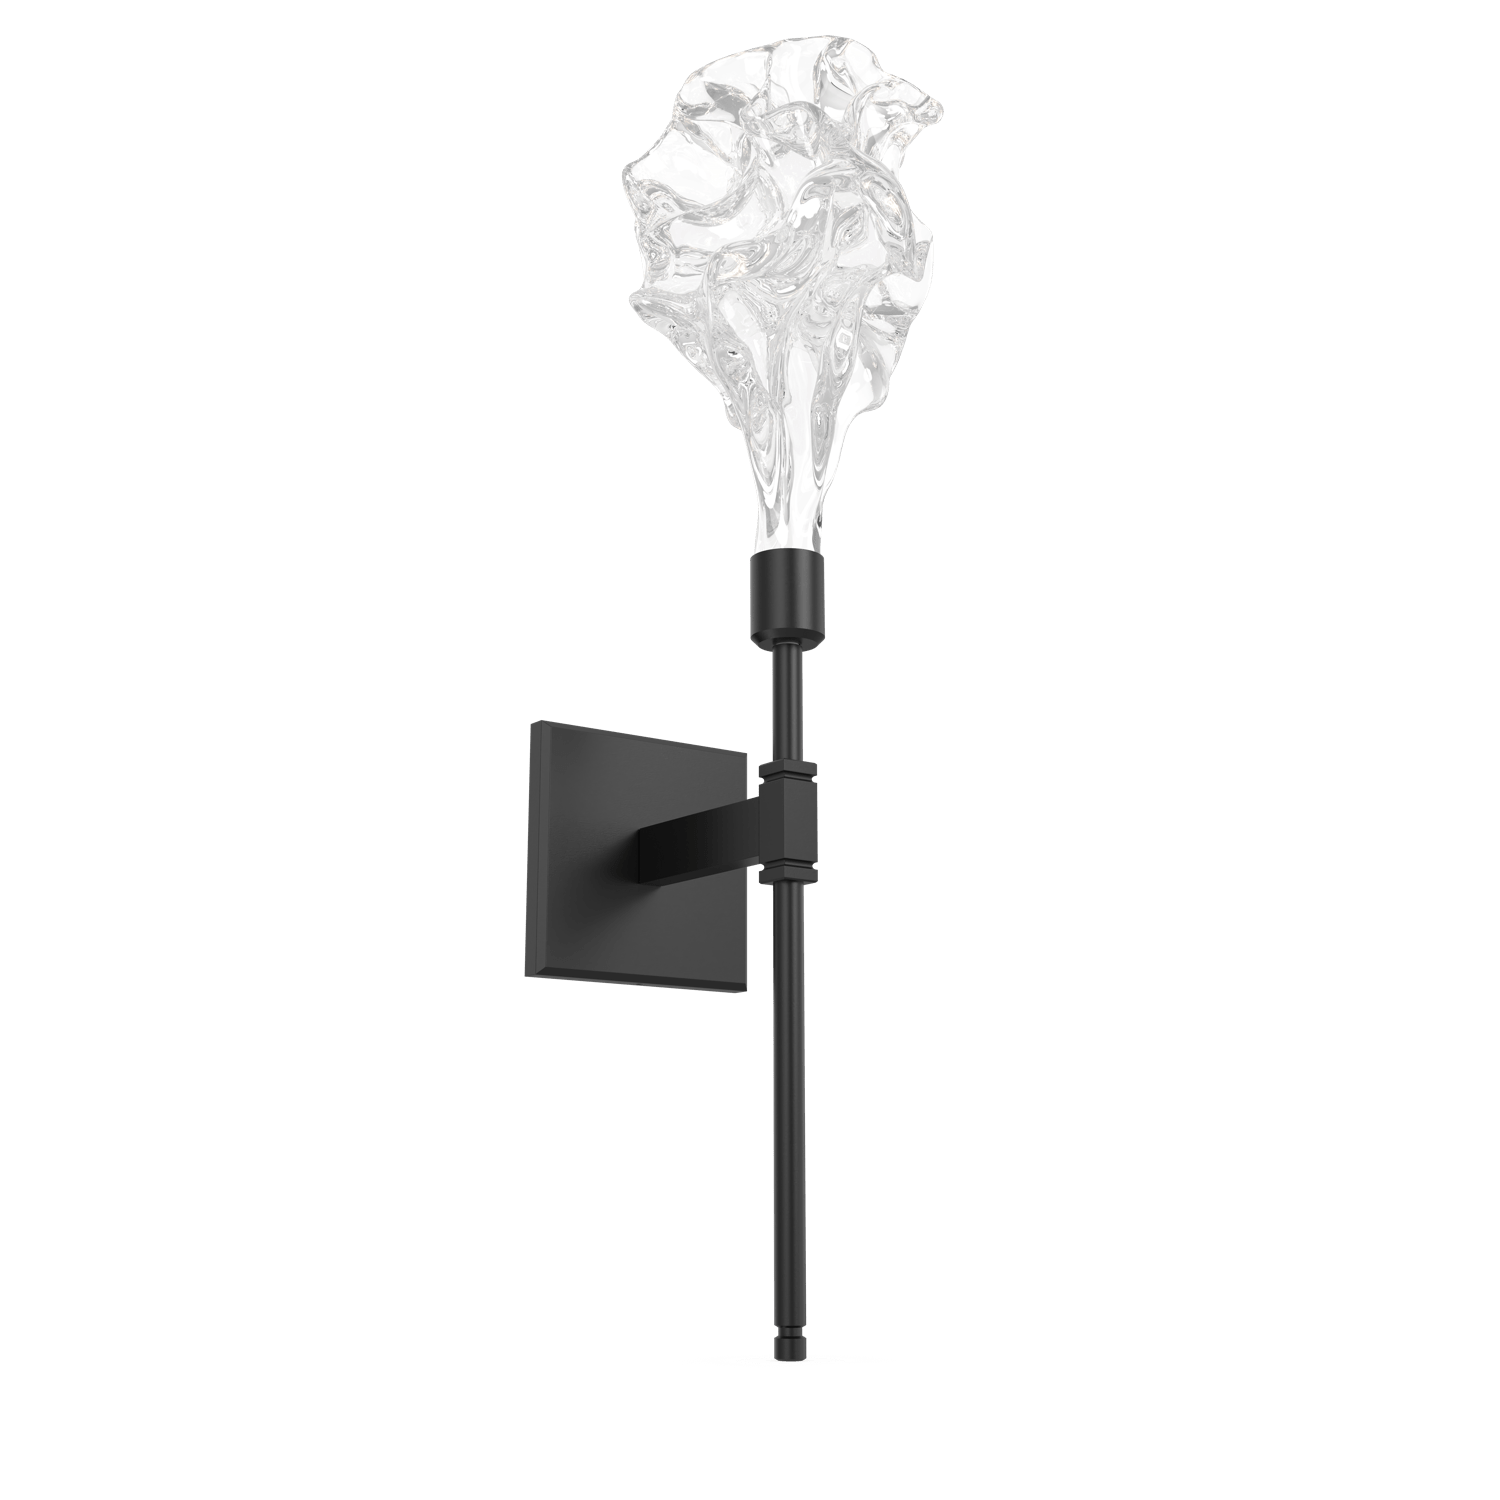 IDB0059-21-MB-Hammerton-Studio-Blossom-belvedere-wall-sconce-with-matte-black-finish-and-clear-handblown-crystal-glass-shades-and-LED-lamping